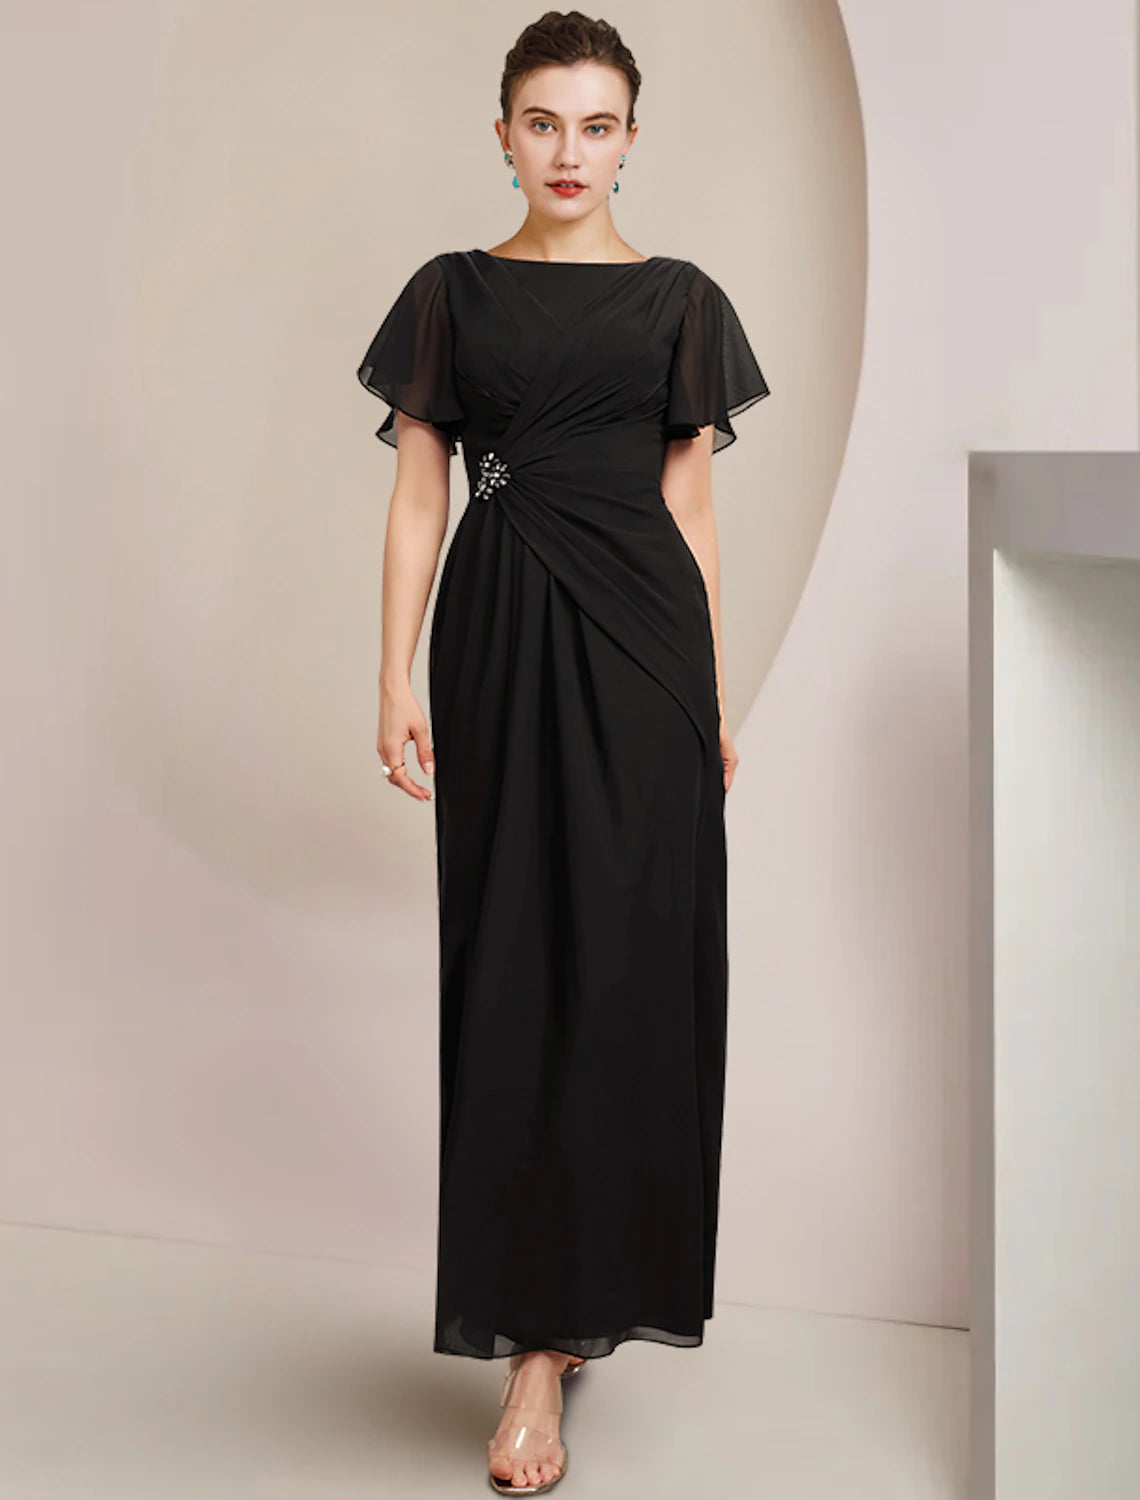 Sheath / Column Mother of the Bride Dress Wedding Guest Elegant Scoop Neck Ankle Length Chiffon Short Sleeve with Crystal Brooch Side-Draped